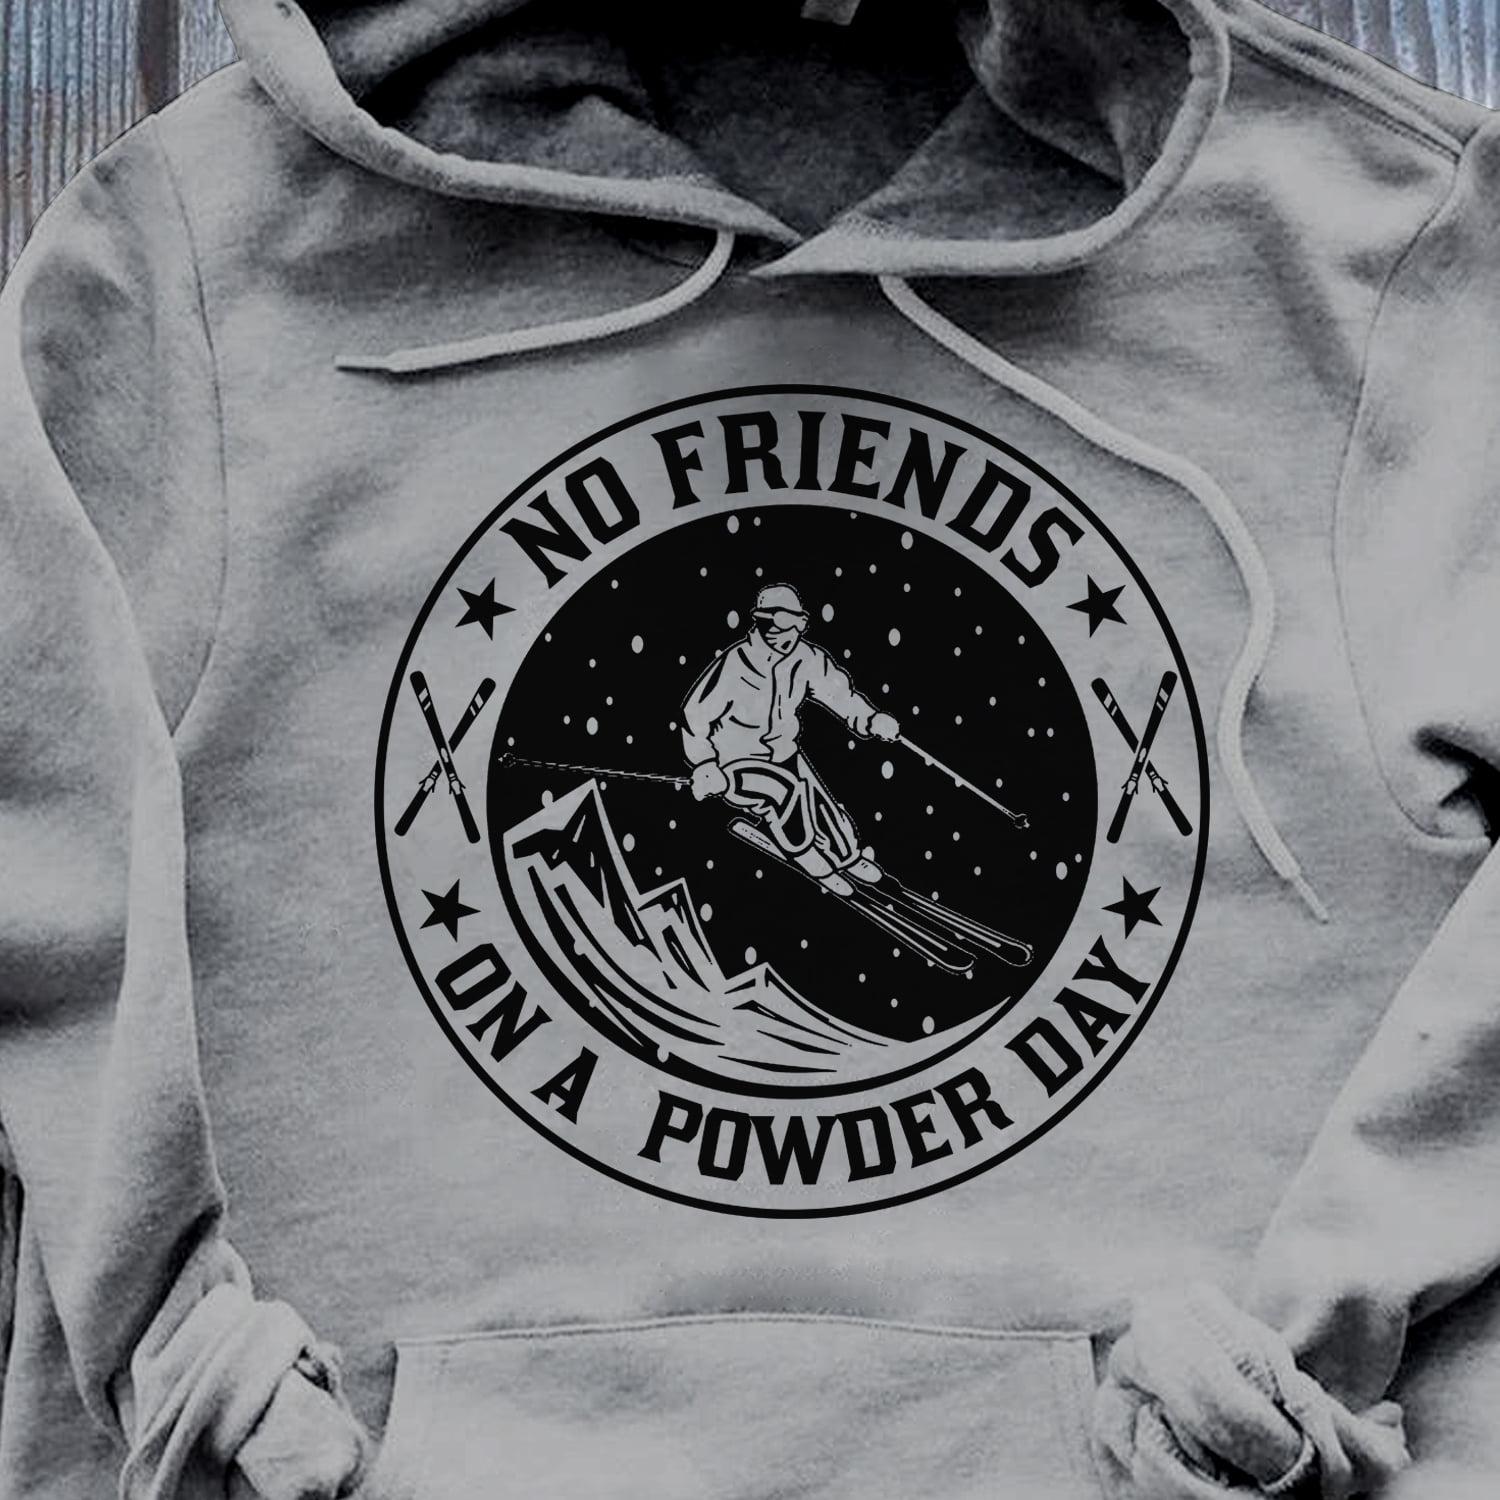 Skiing Man - No friends on a power day